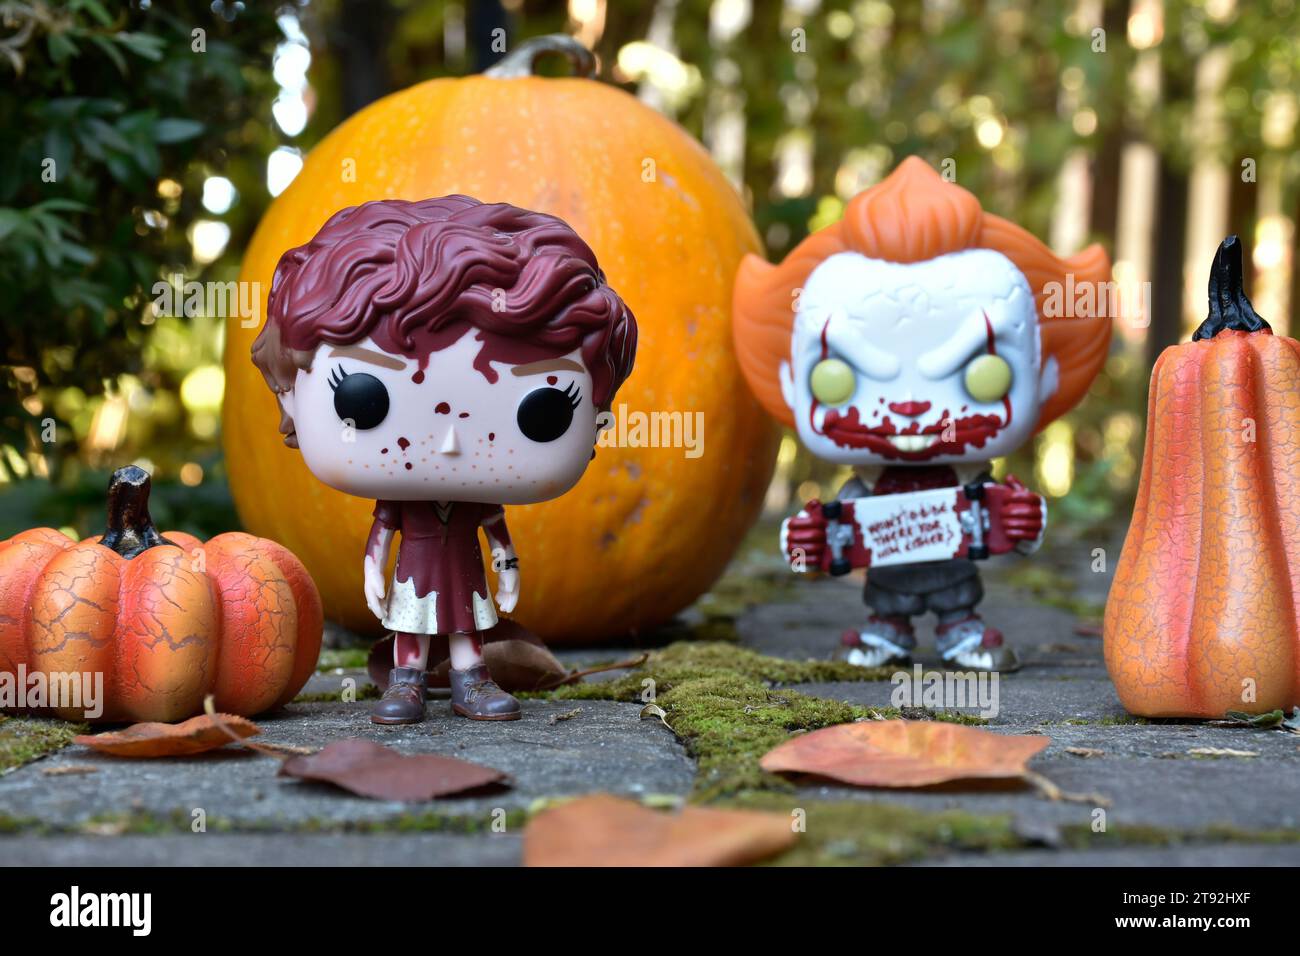 Funko Pop action figures of Beverly Marsh and Pennywise clown from horror movie It. Halloween, spooky season, pumpkins, decor, moss, autumn leaves. Stock Photo